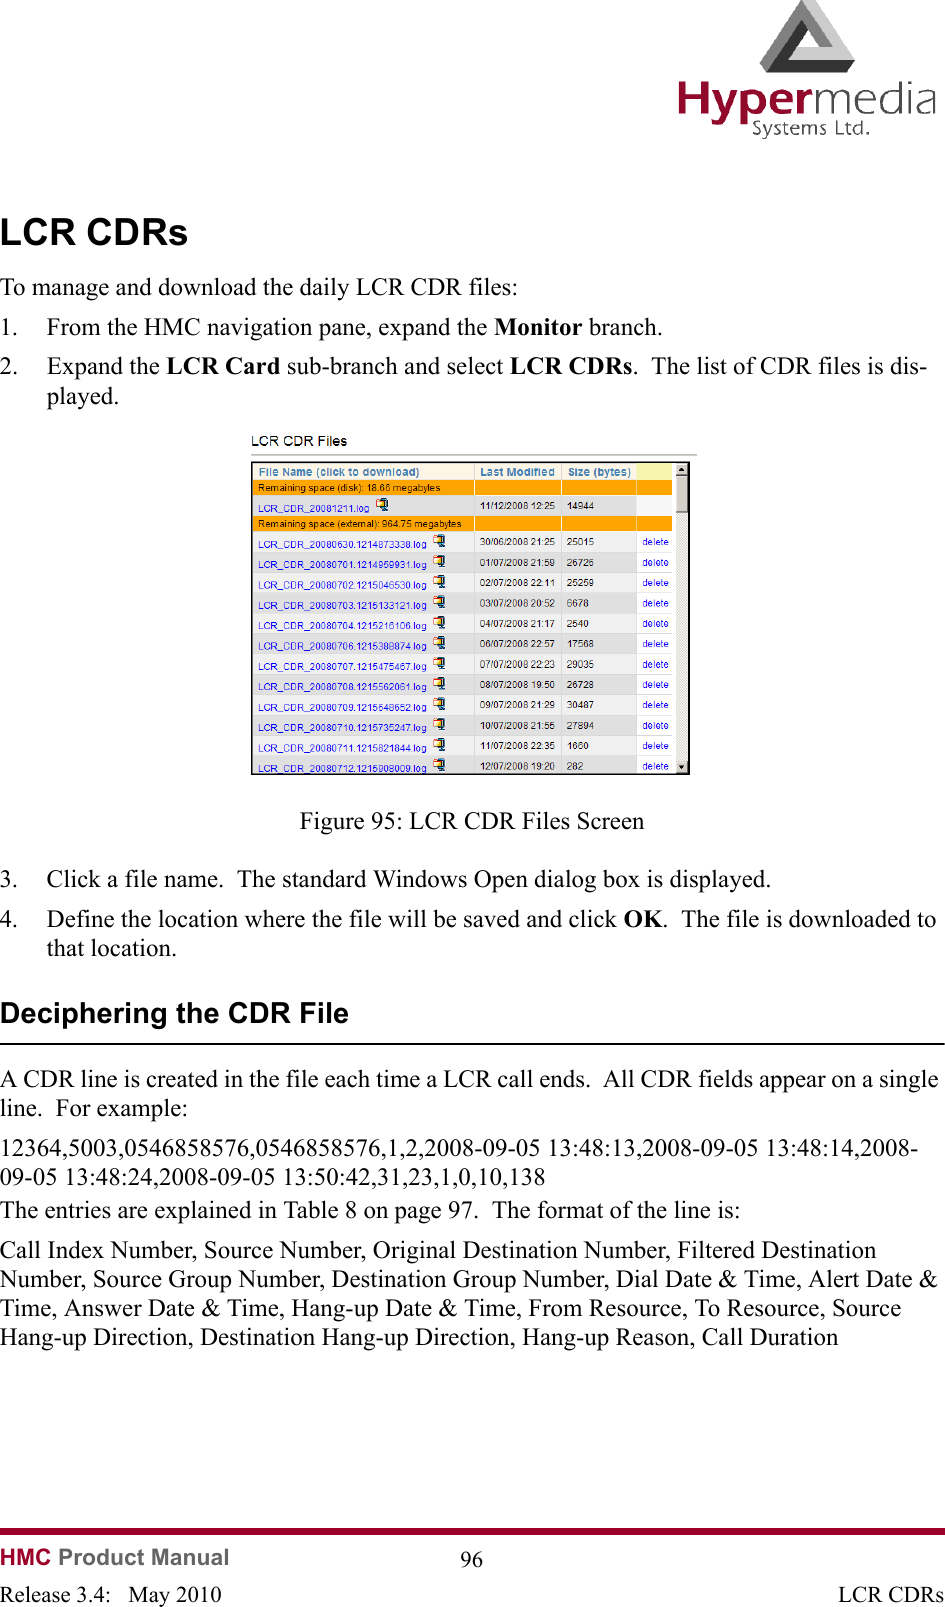   HMC Product Manual  96Release 3.4:   May 2010 LCR CDRsLCR CDRsTo manage and download the daily LCR CDR files:1. From the HMC navigation pane, expand the Monitor branch.2. Expand the LCR Card sub-branch and select LCR CDRs.  The list of CDR files is dis-played.              Figure 95: LCR CDR Files Screen3. Click a file name.  The standard Windows Open dialog box is displayed.4. Define the location where the file will be saved and click OK.  The file is downloaded to that location.Deciphering the CDR FileA CDR line is created in the file each time a LCR call ends.  All CDR fields appear on a single line.  For example:12364,5003,0546858576,0546858576,1,2,2008-09-05 13:48:13,2008-09-05 13:48:14,2008-09-05 13:48:24,2008-09-05 13:50:42,31,23,1,0,10,138The entries are explained in Table 8 on page 97.  The format of the line is:Call Index Number, Source Number, Original Destination Number, Filtered Destination Number, Source Group Number, Destination Group Number, Dial Date &amp; Time, Alert Date &amp; Time, Answer Date &amp; Time, Hang-up Date &amp; Time, From Resource, To Resource, Source Hang-up Direction, Destination Hang-up Direction, Hang-up Reason, Call Duration